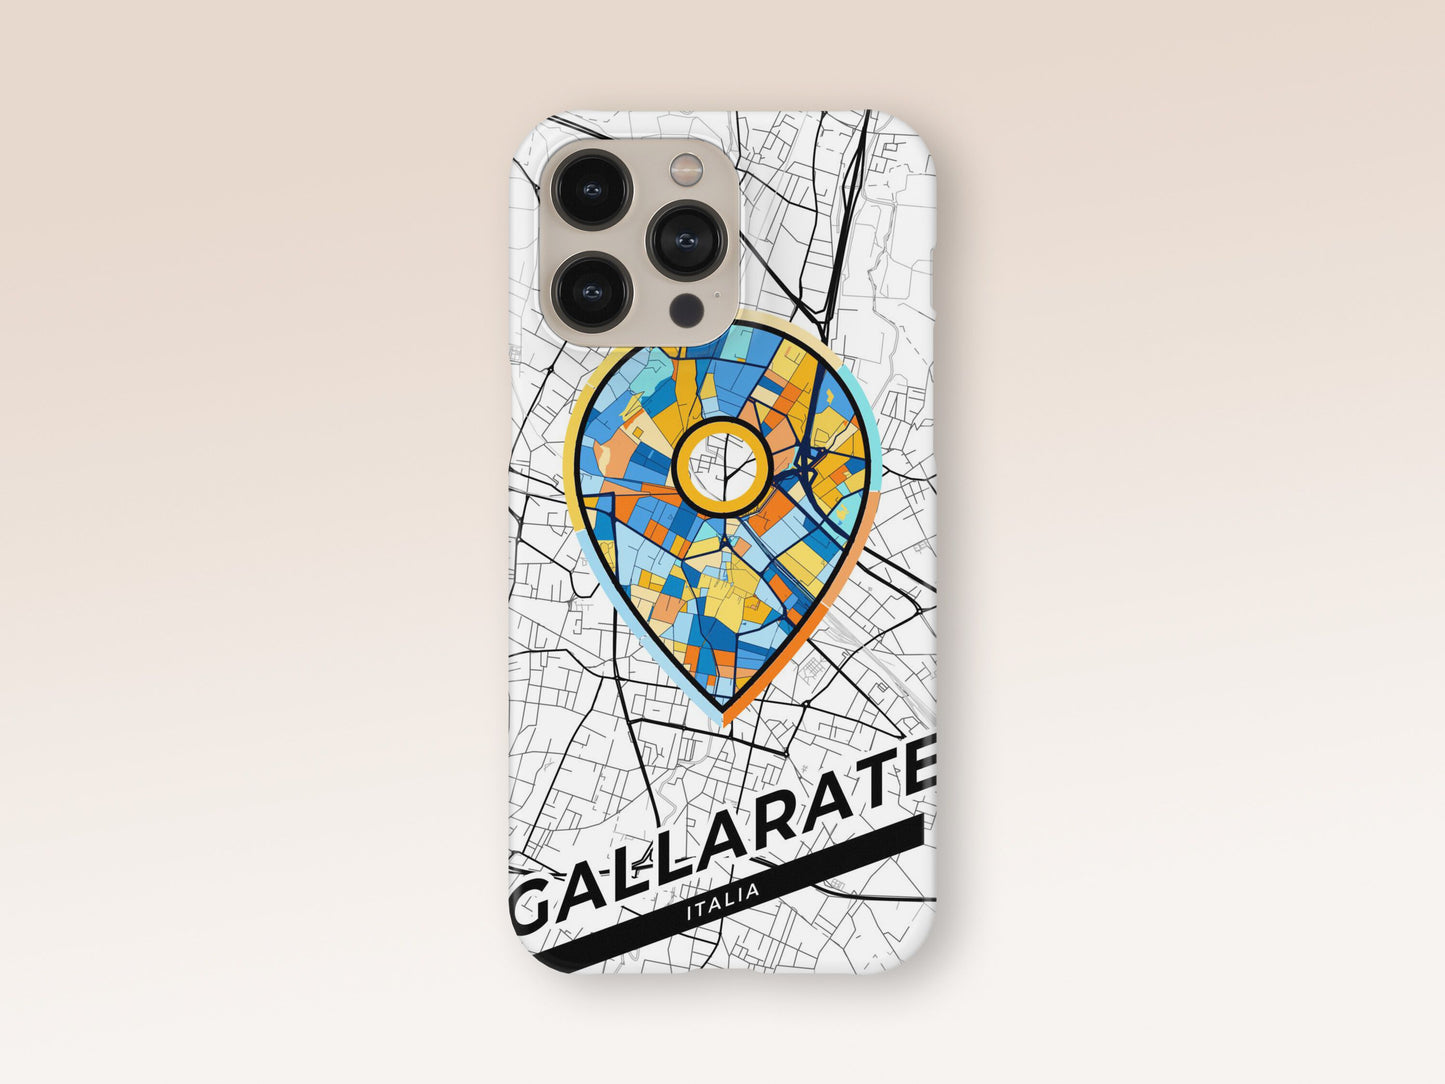 Gallarate Italy slim phone case with colorful icon. Birthday, wedding or housewarming gift. Couple match cases. 1